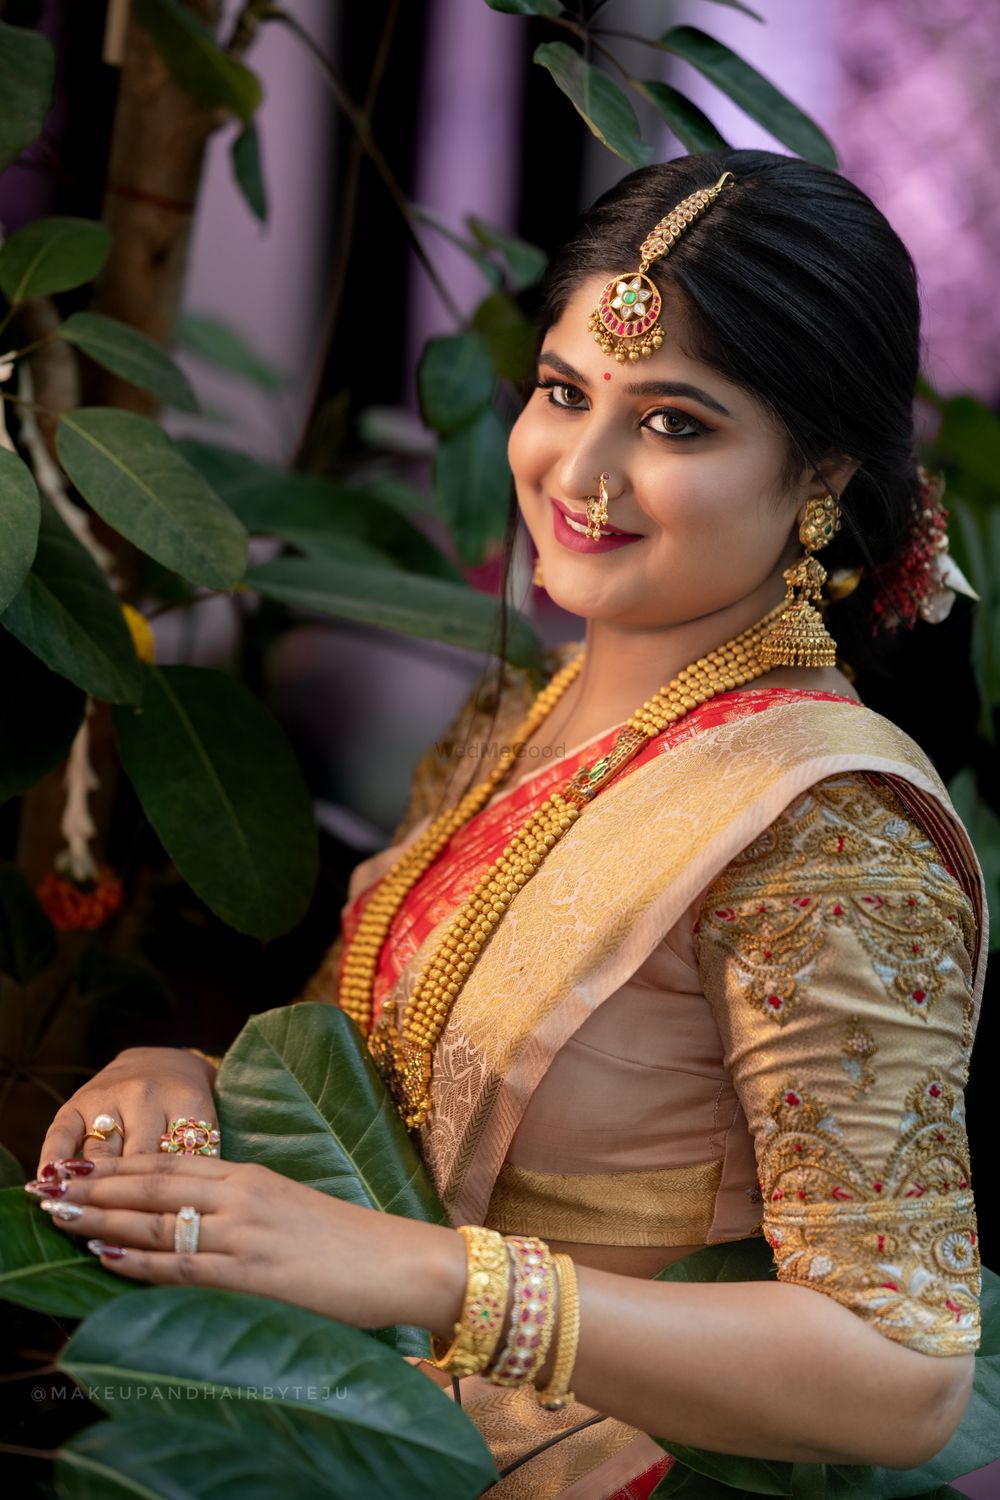 Photo From Yogitha beegara oota and lagna  - By Makeup and Hair by Teju